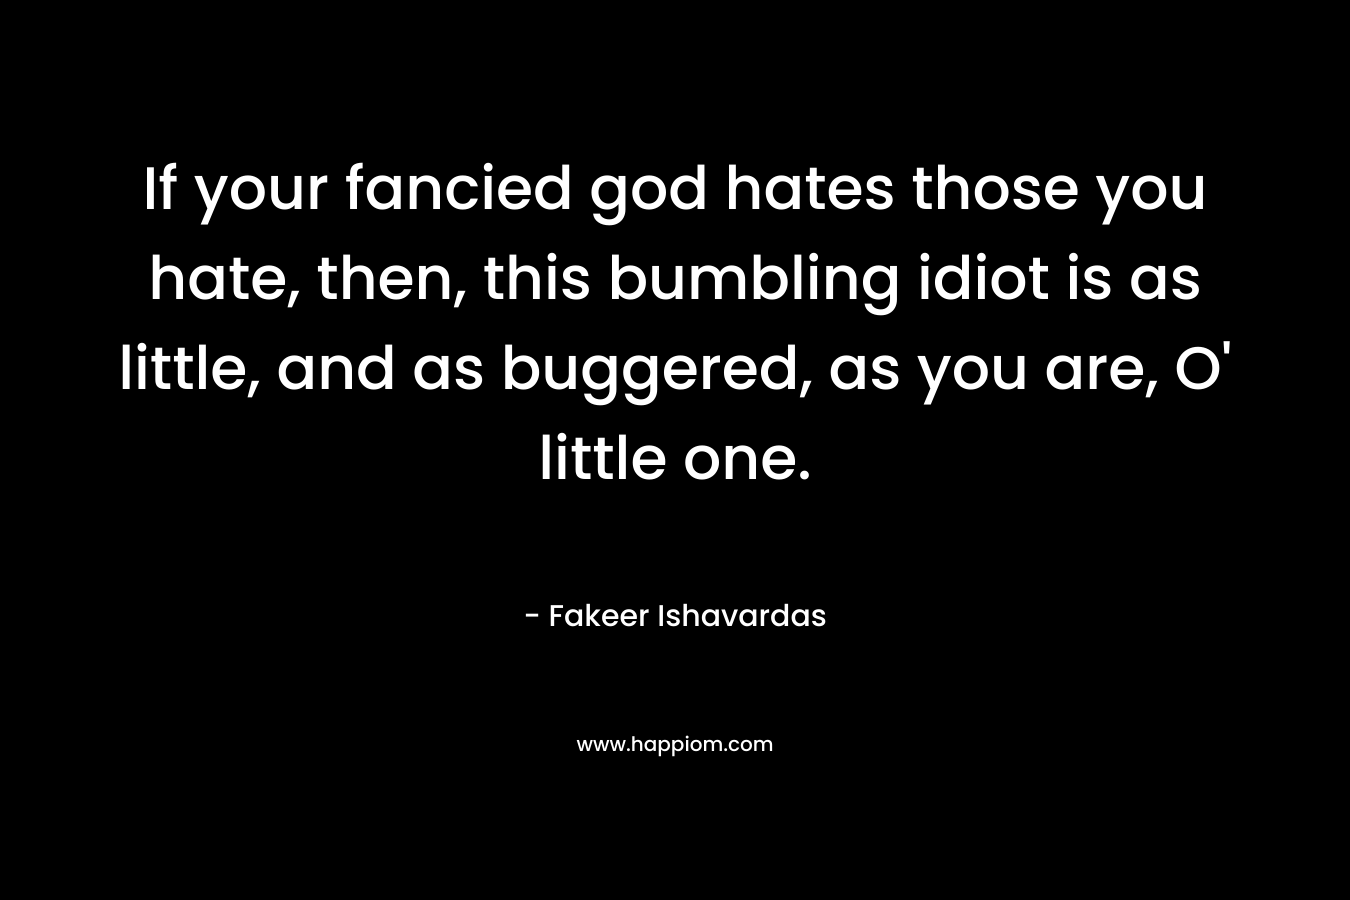 If your fancied god hates those you hate, then, this bumbling idiot is as little, and as buggered, as you are, O’ little one. – Fakeer Ishavardas